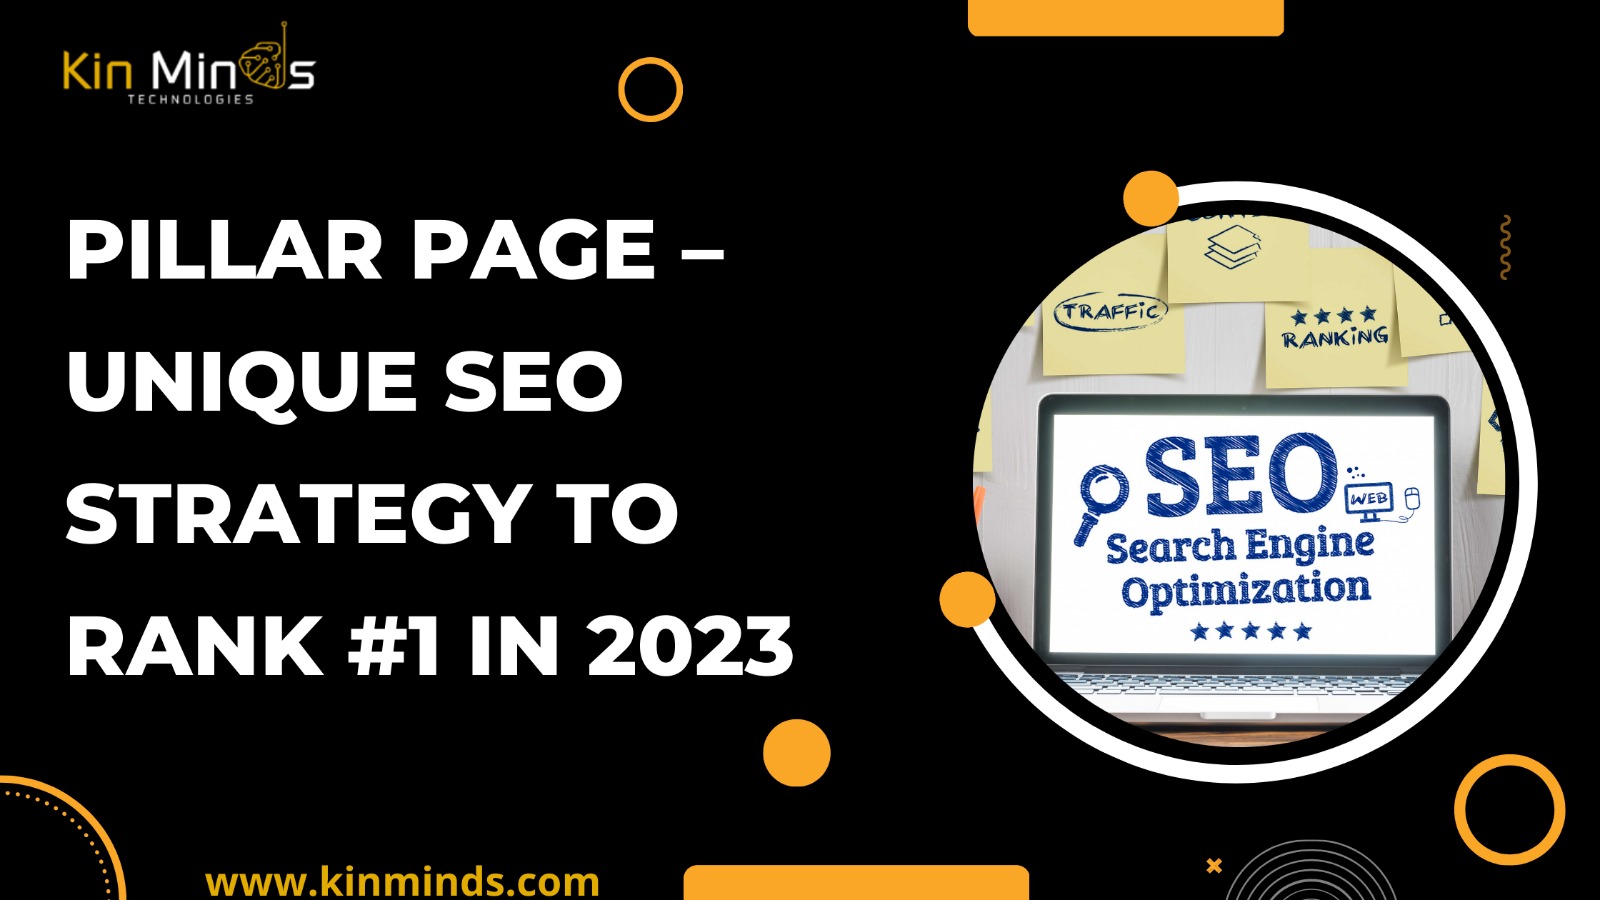 Pillar Page – Unique SEO Strategy to rank #1 in 2023